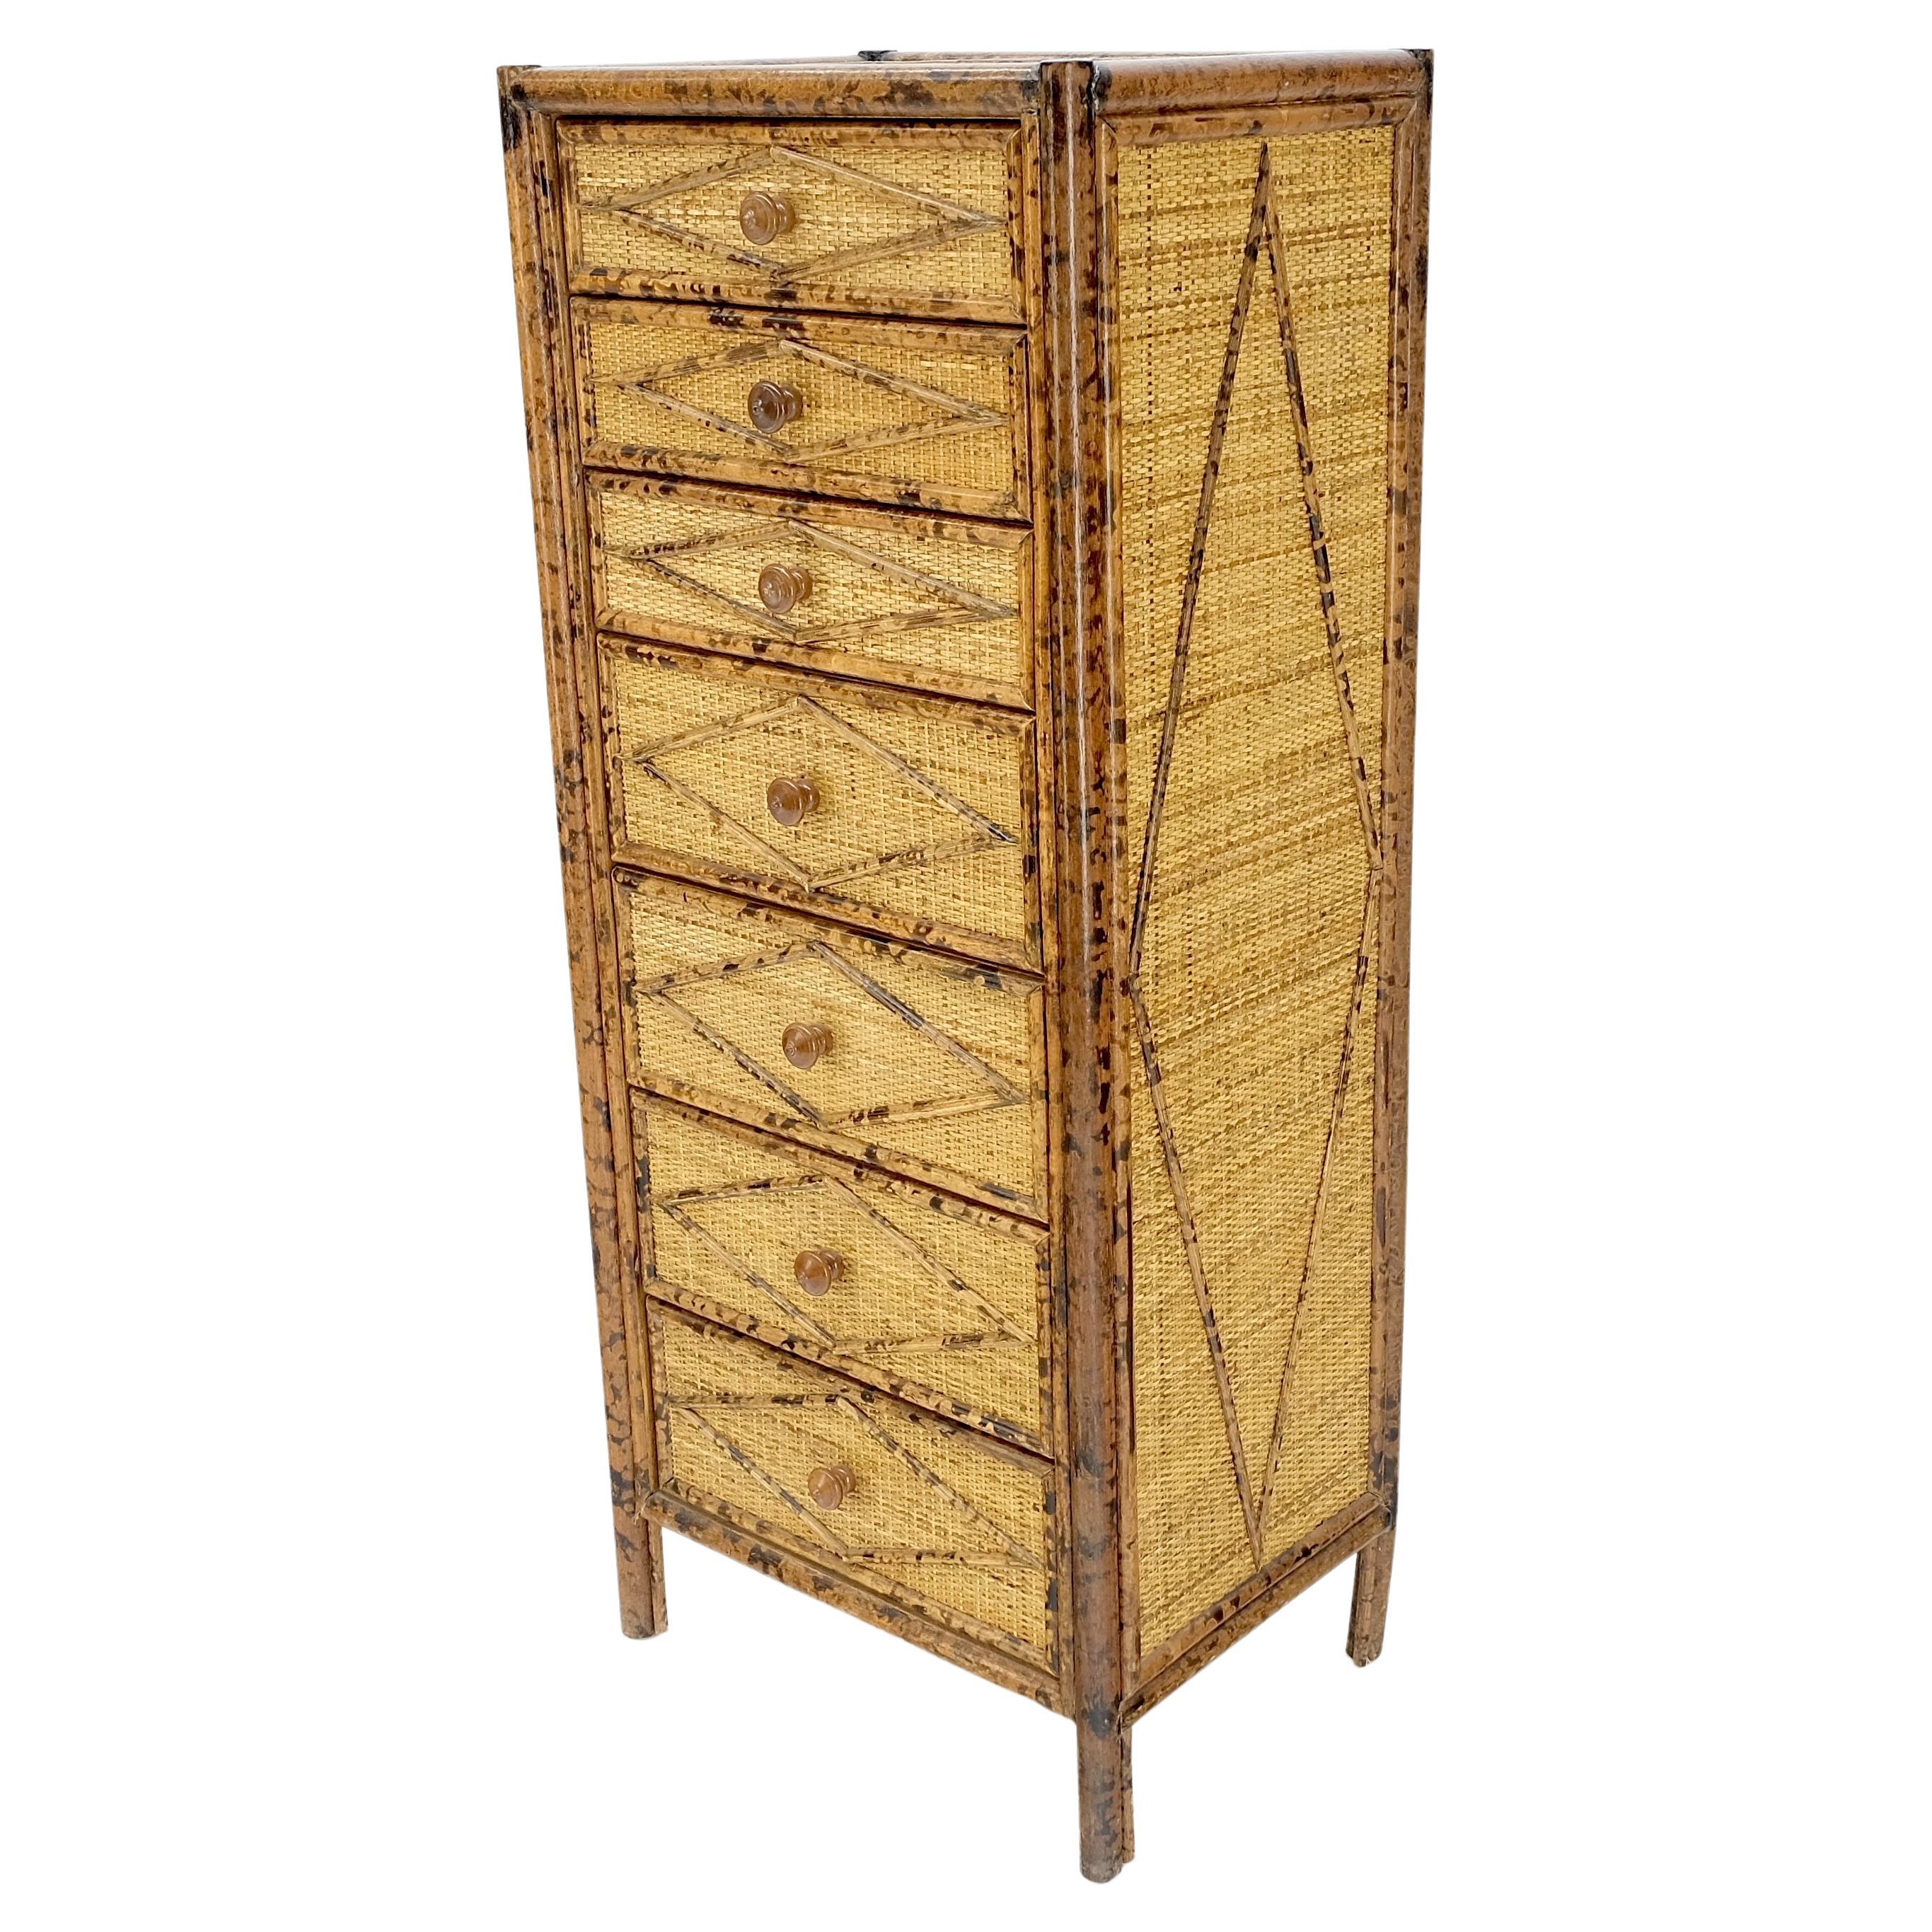 Tall Burnt Bamboo Cane Lingerie Chest of Drawers Dresser Cabinet Stunning MINT!